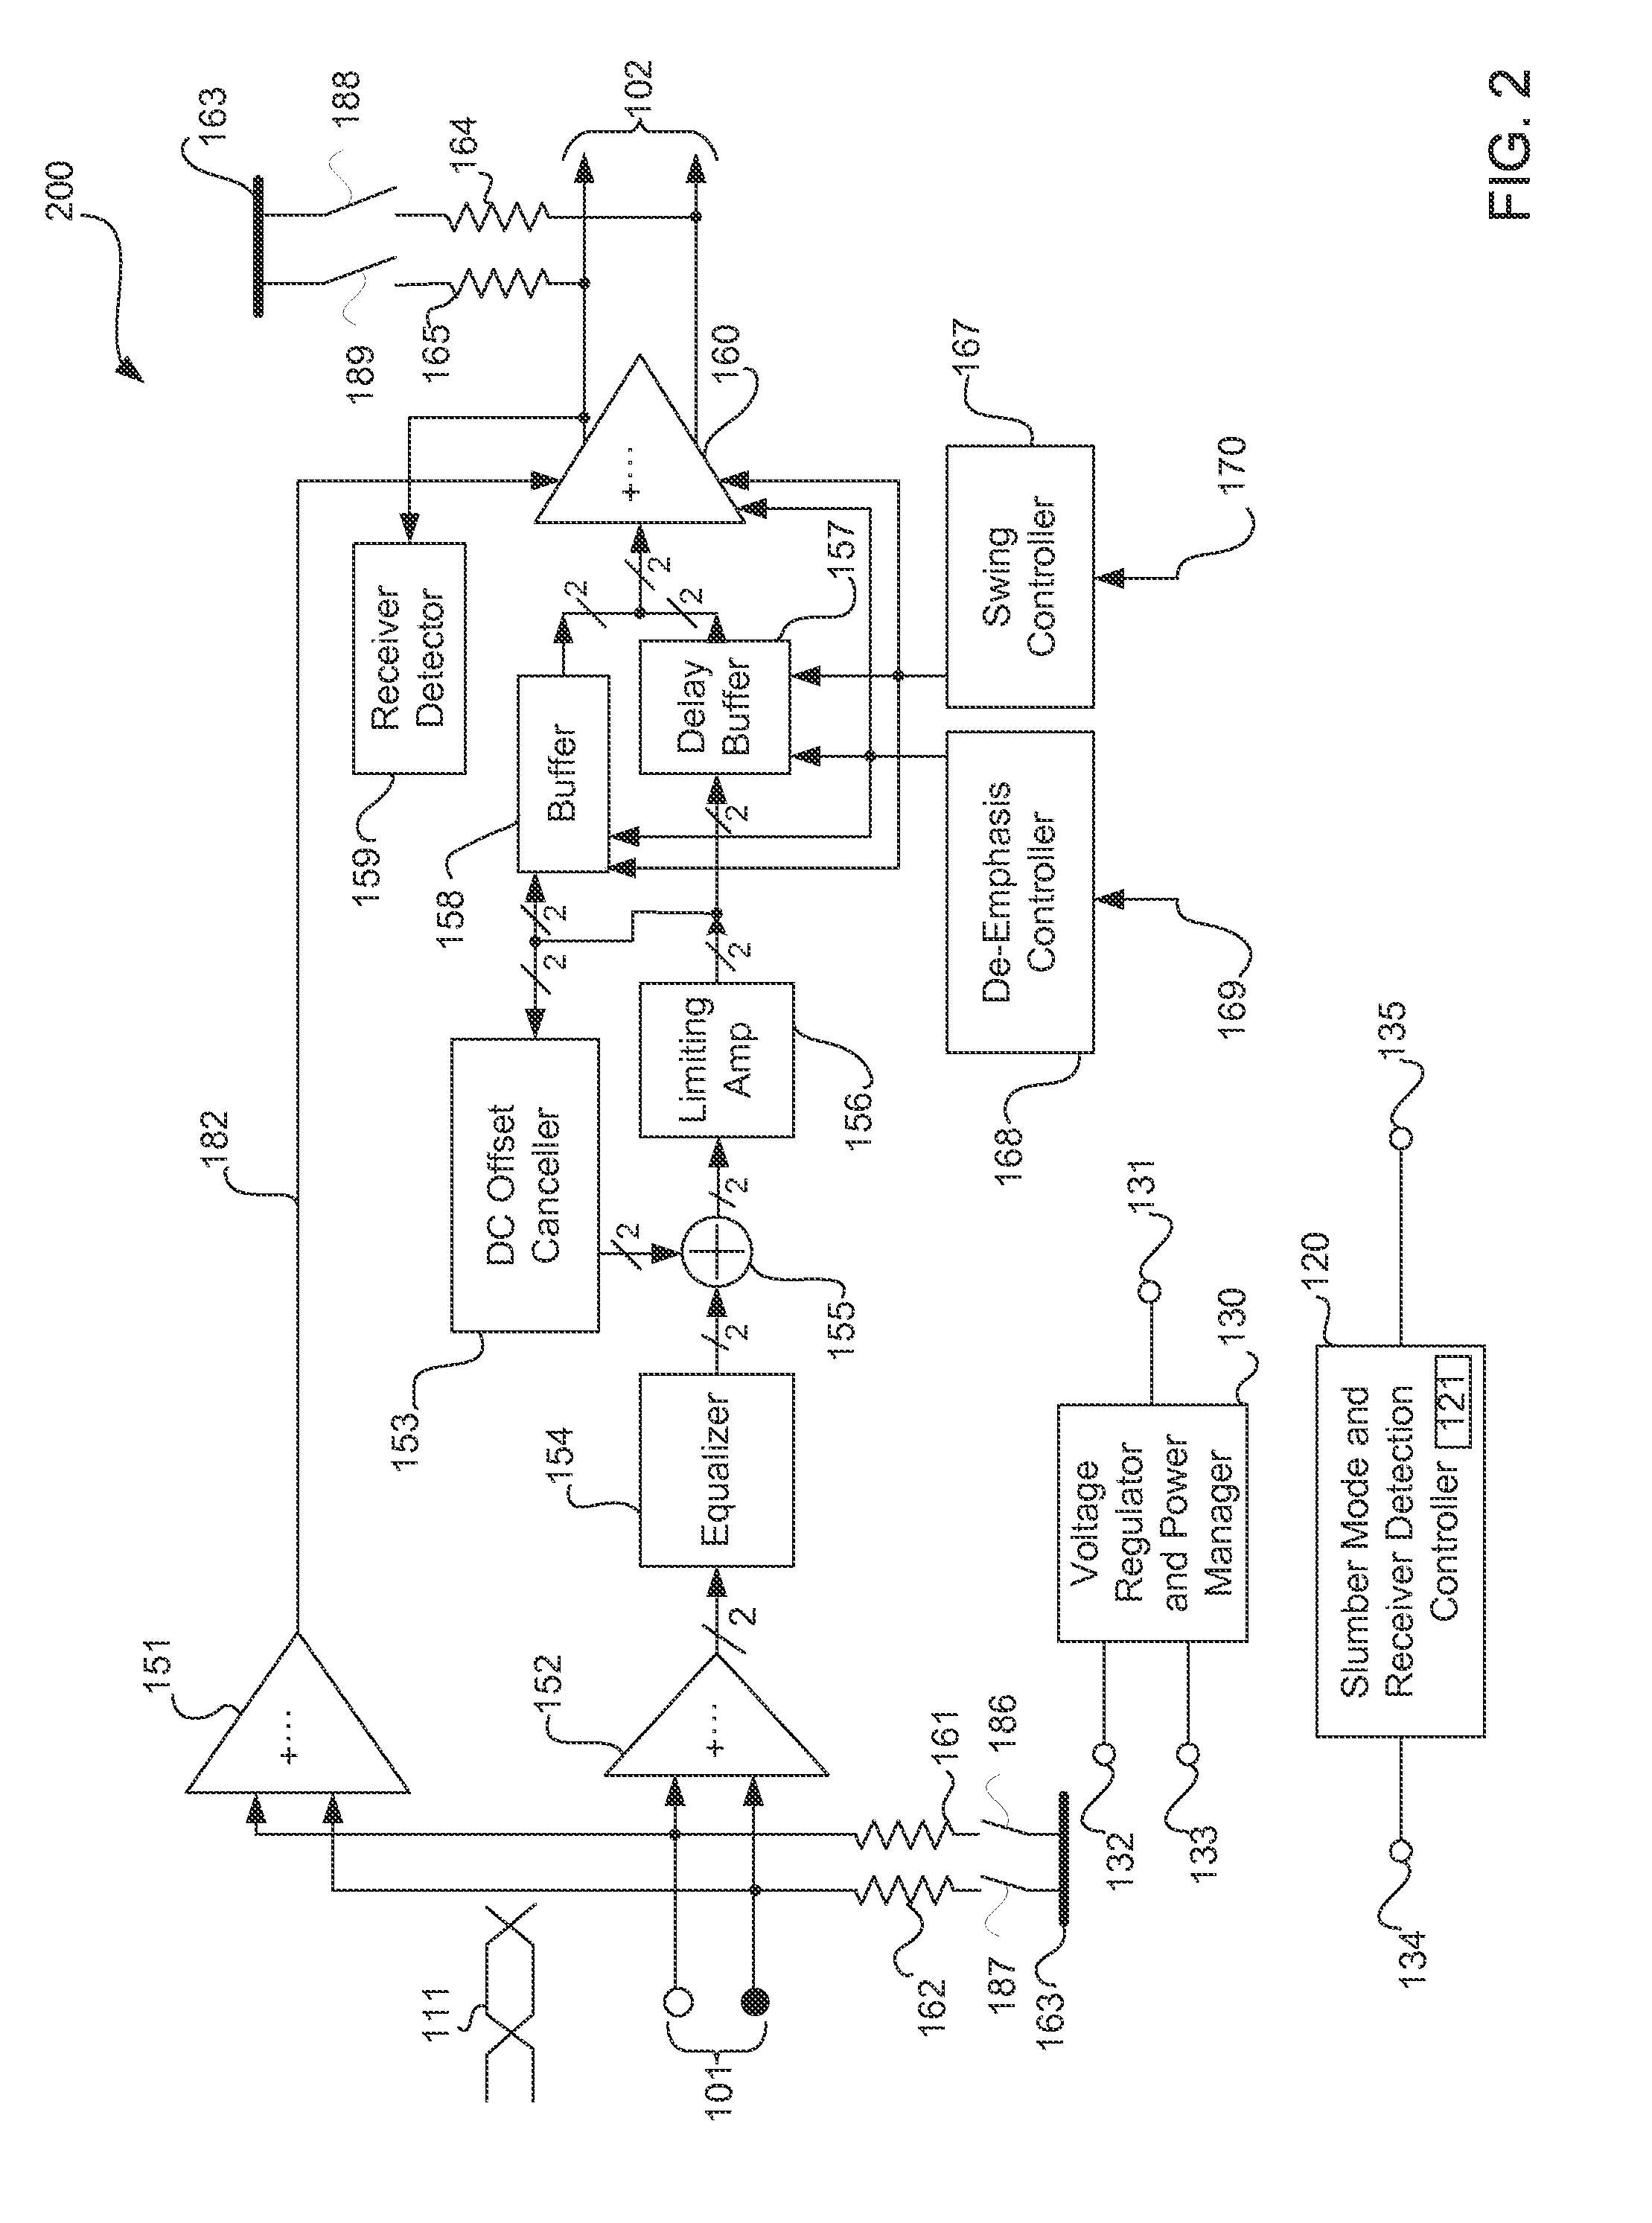 Intermediary signal conditioning device with interruptible detection mode